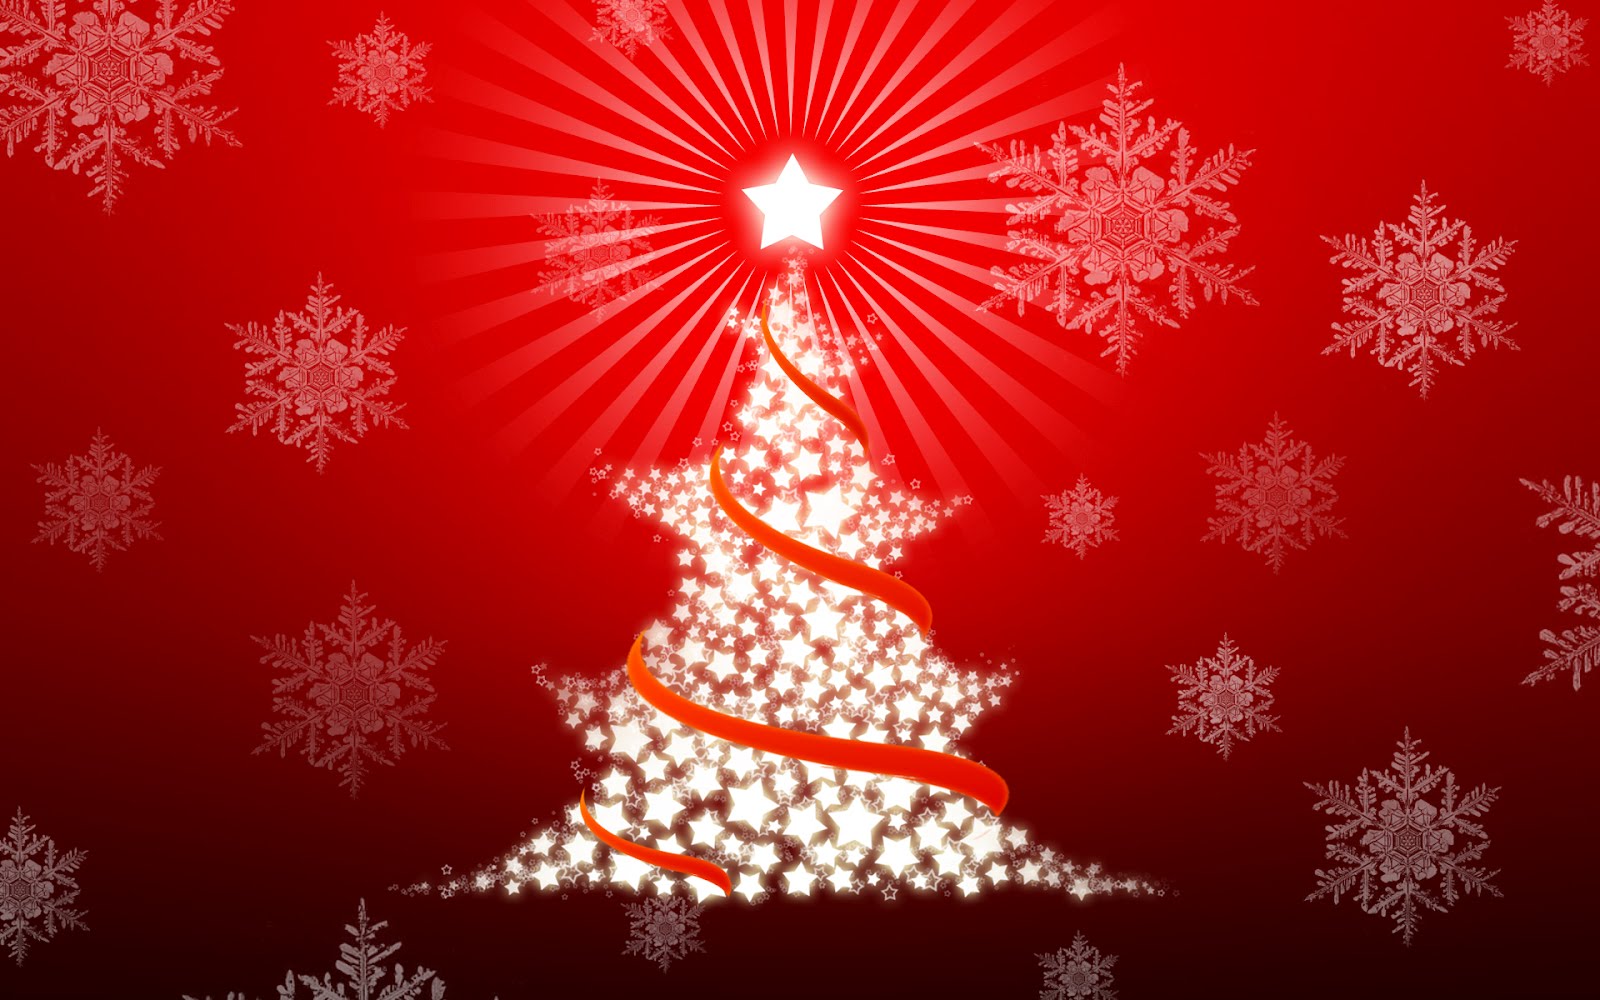 Merry Christmas 2014 Wallpaper Photo Backgrounds